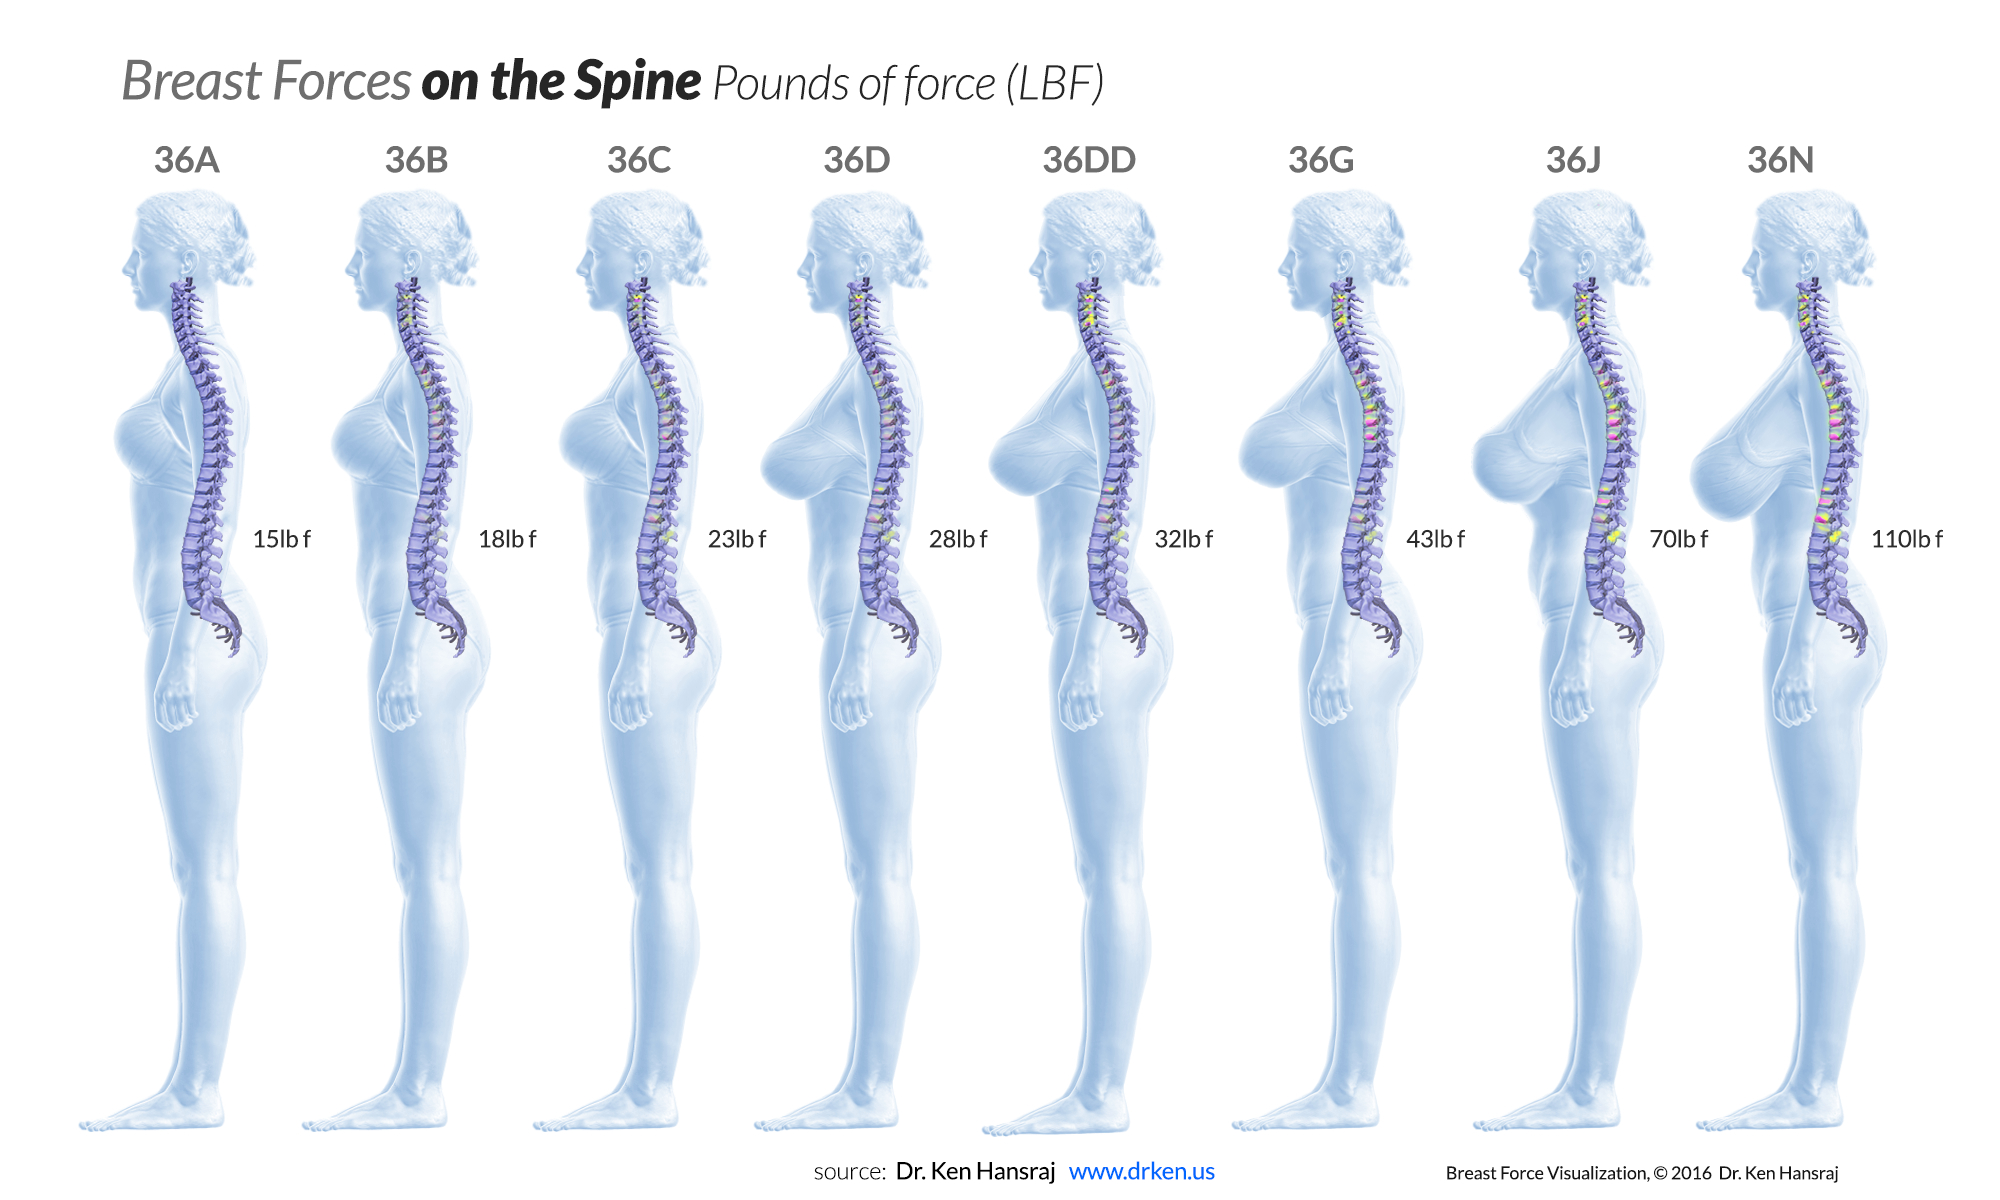 new-study-reveals-increasing-one-cup-size-adds-nearly-10-pound-strain-on-the-spine